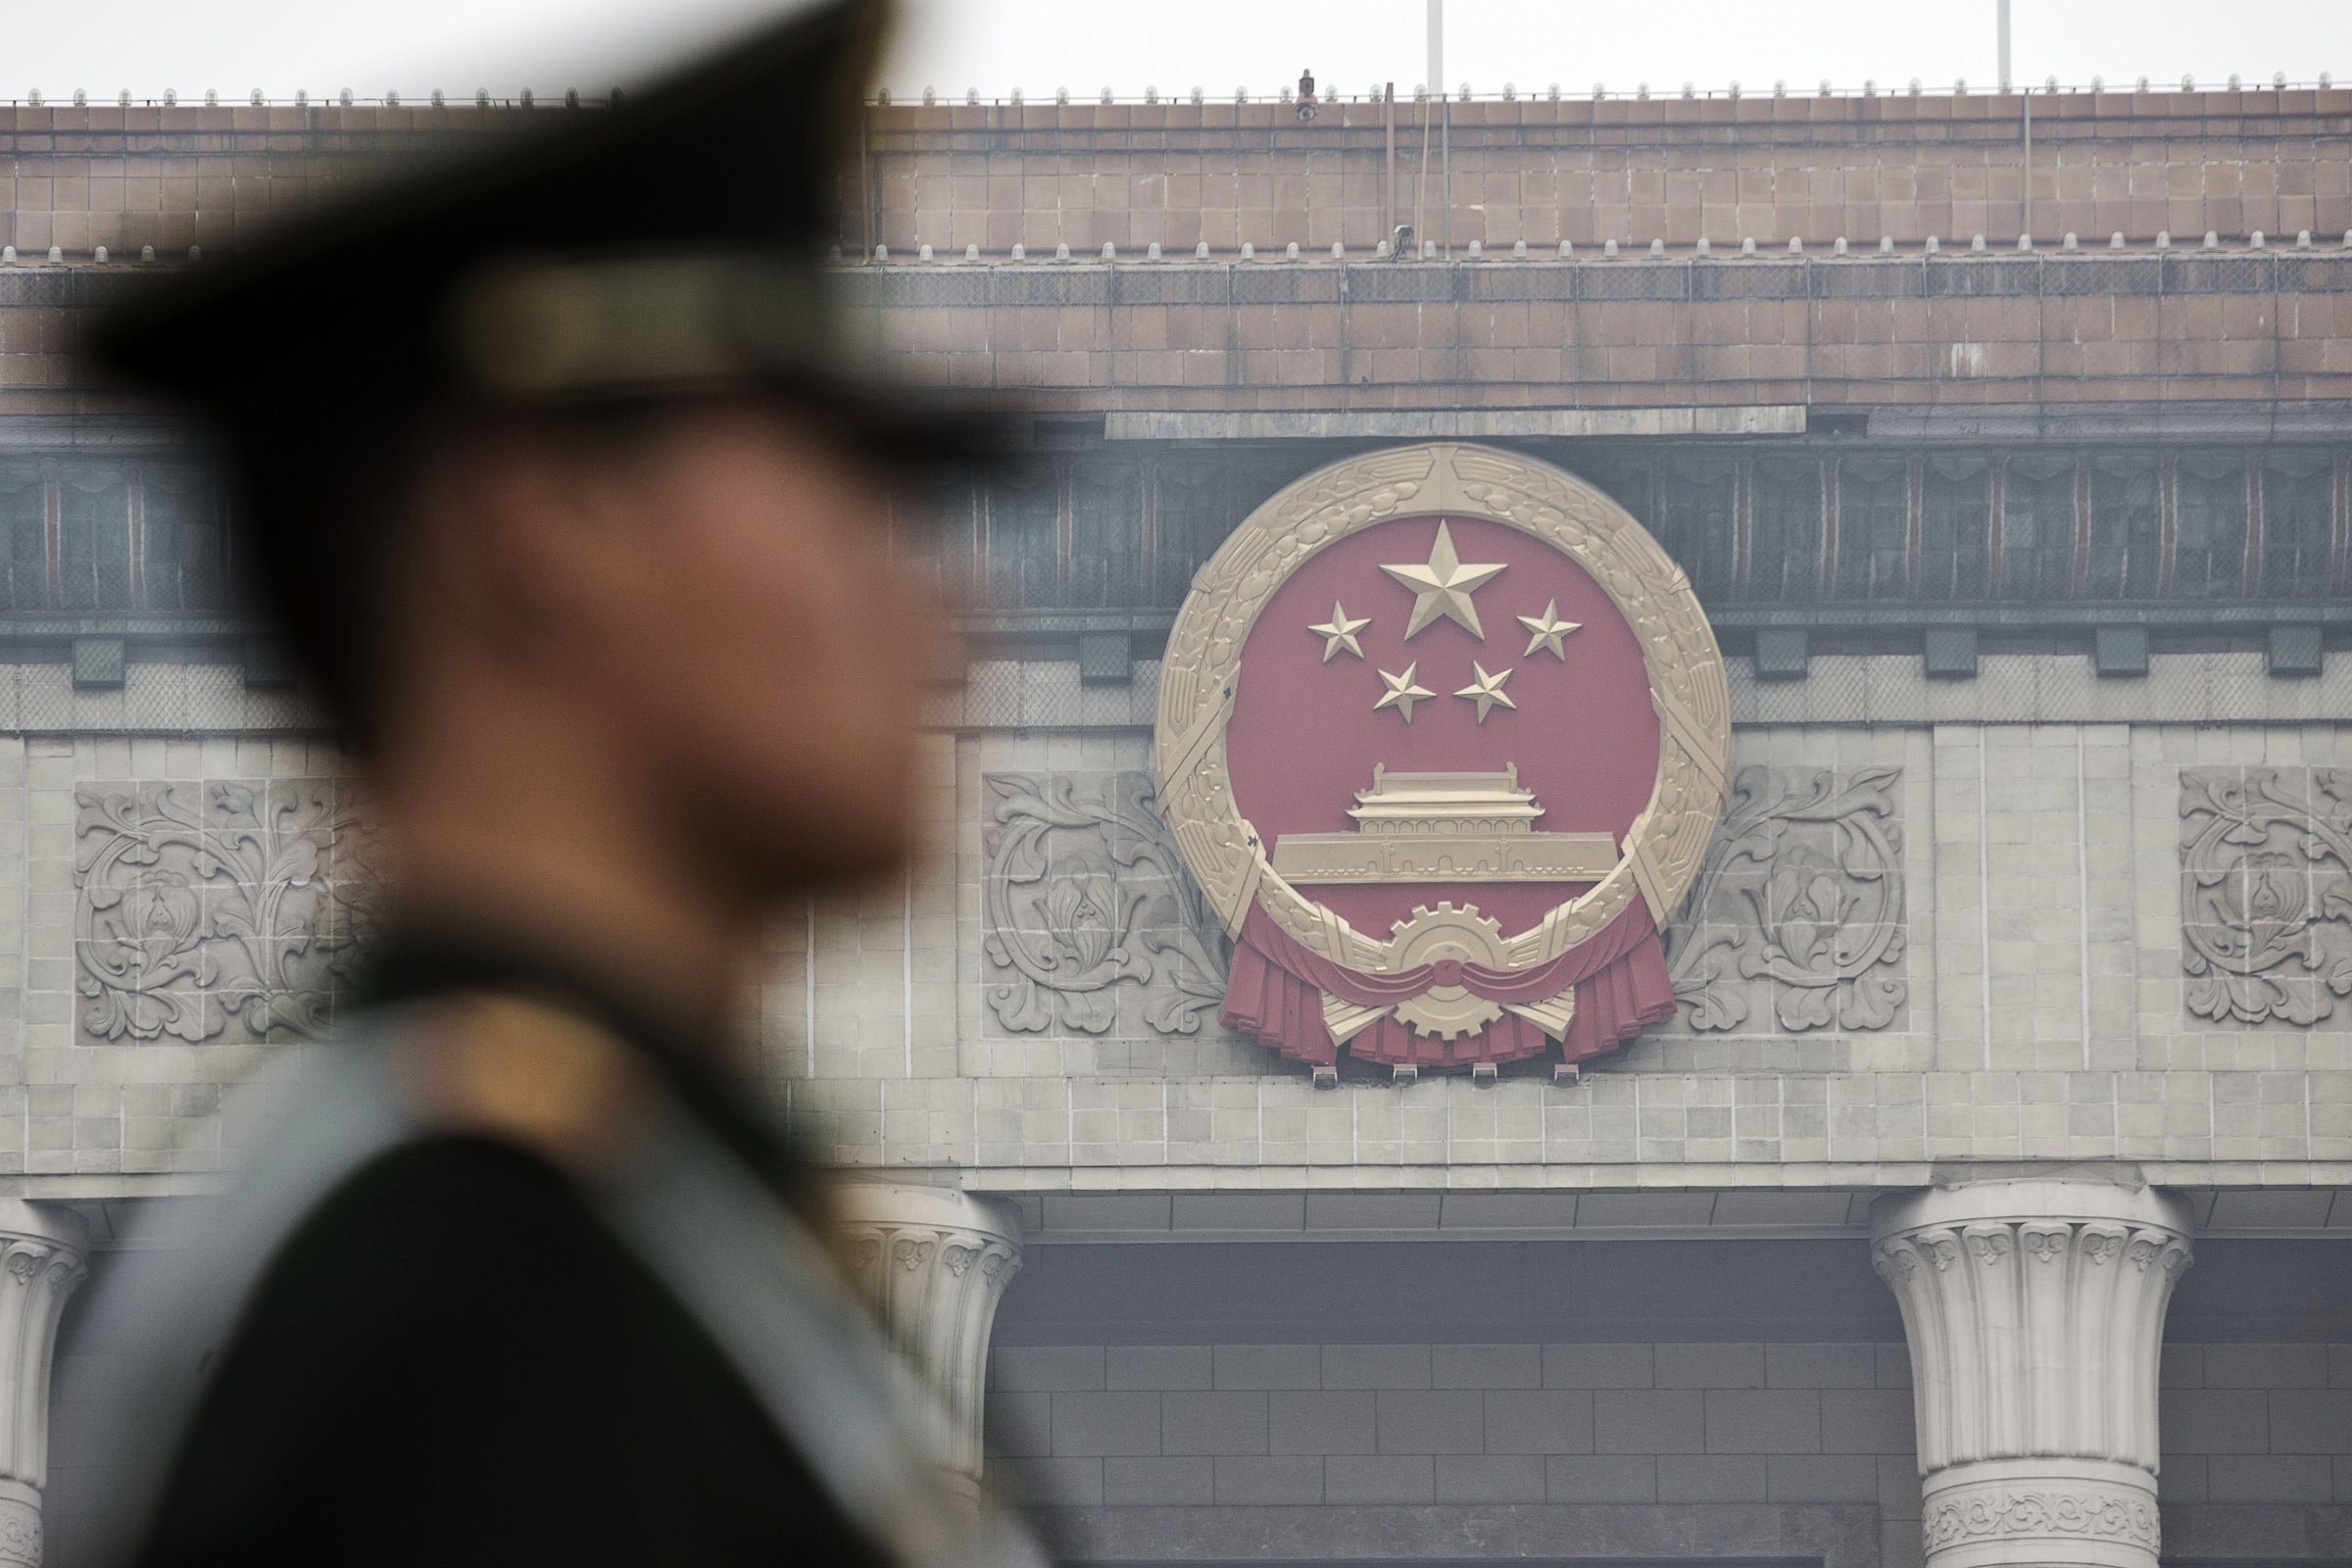 General Economy And Views Of Tiananmen Gate Ahead Of China's National People's Congress